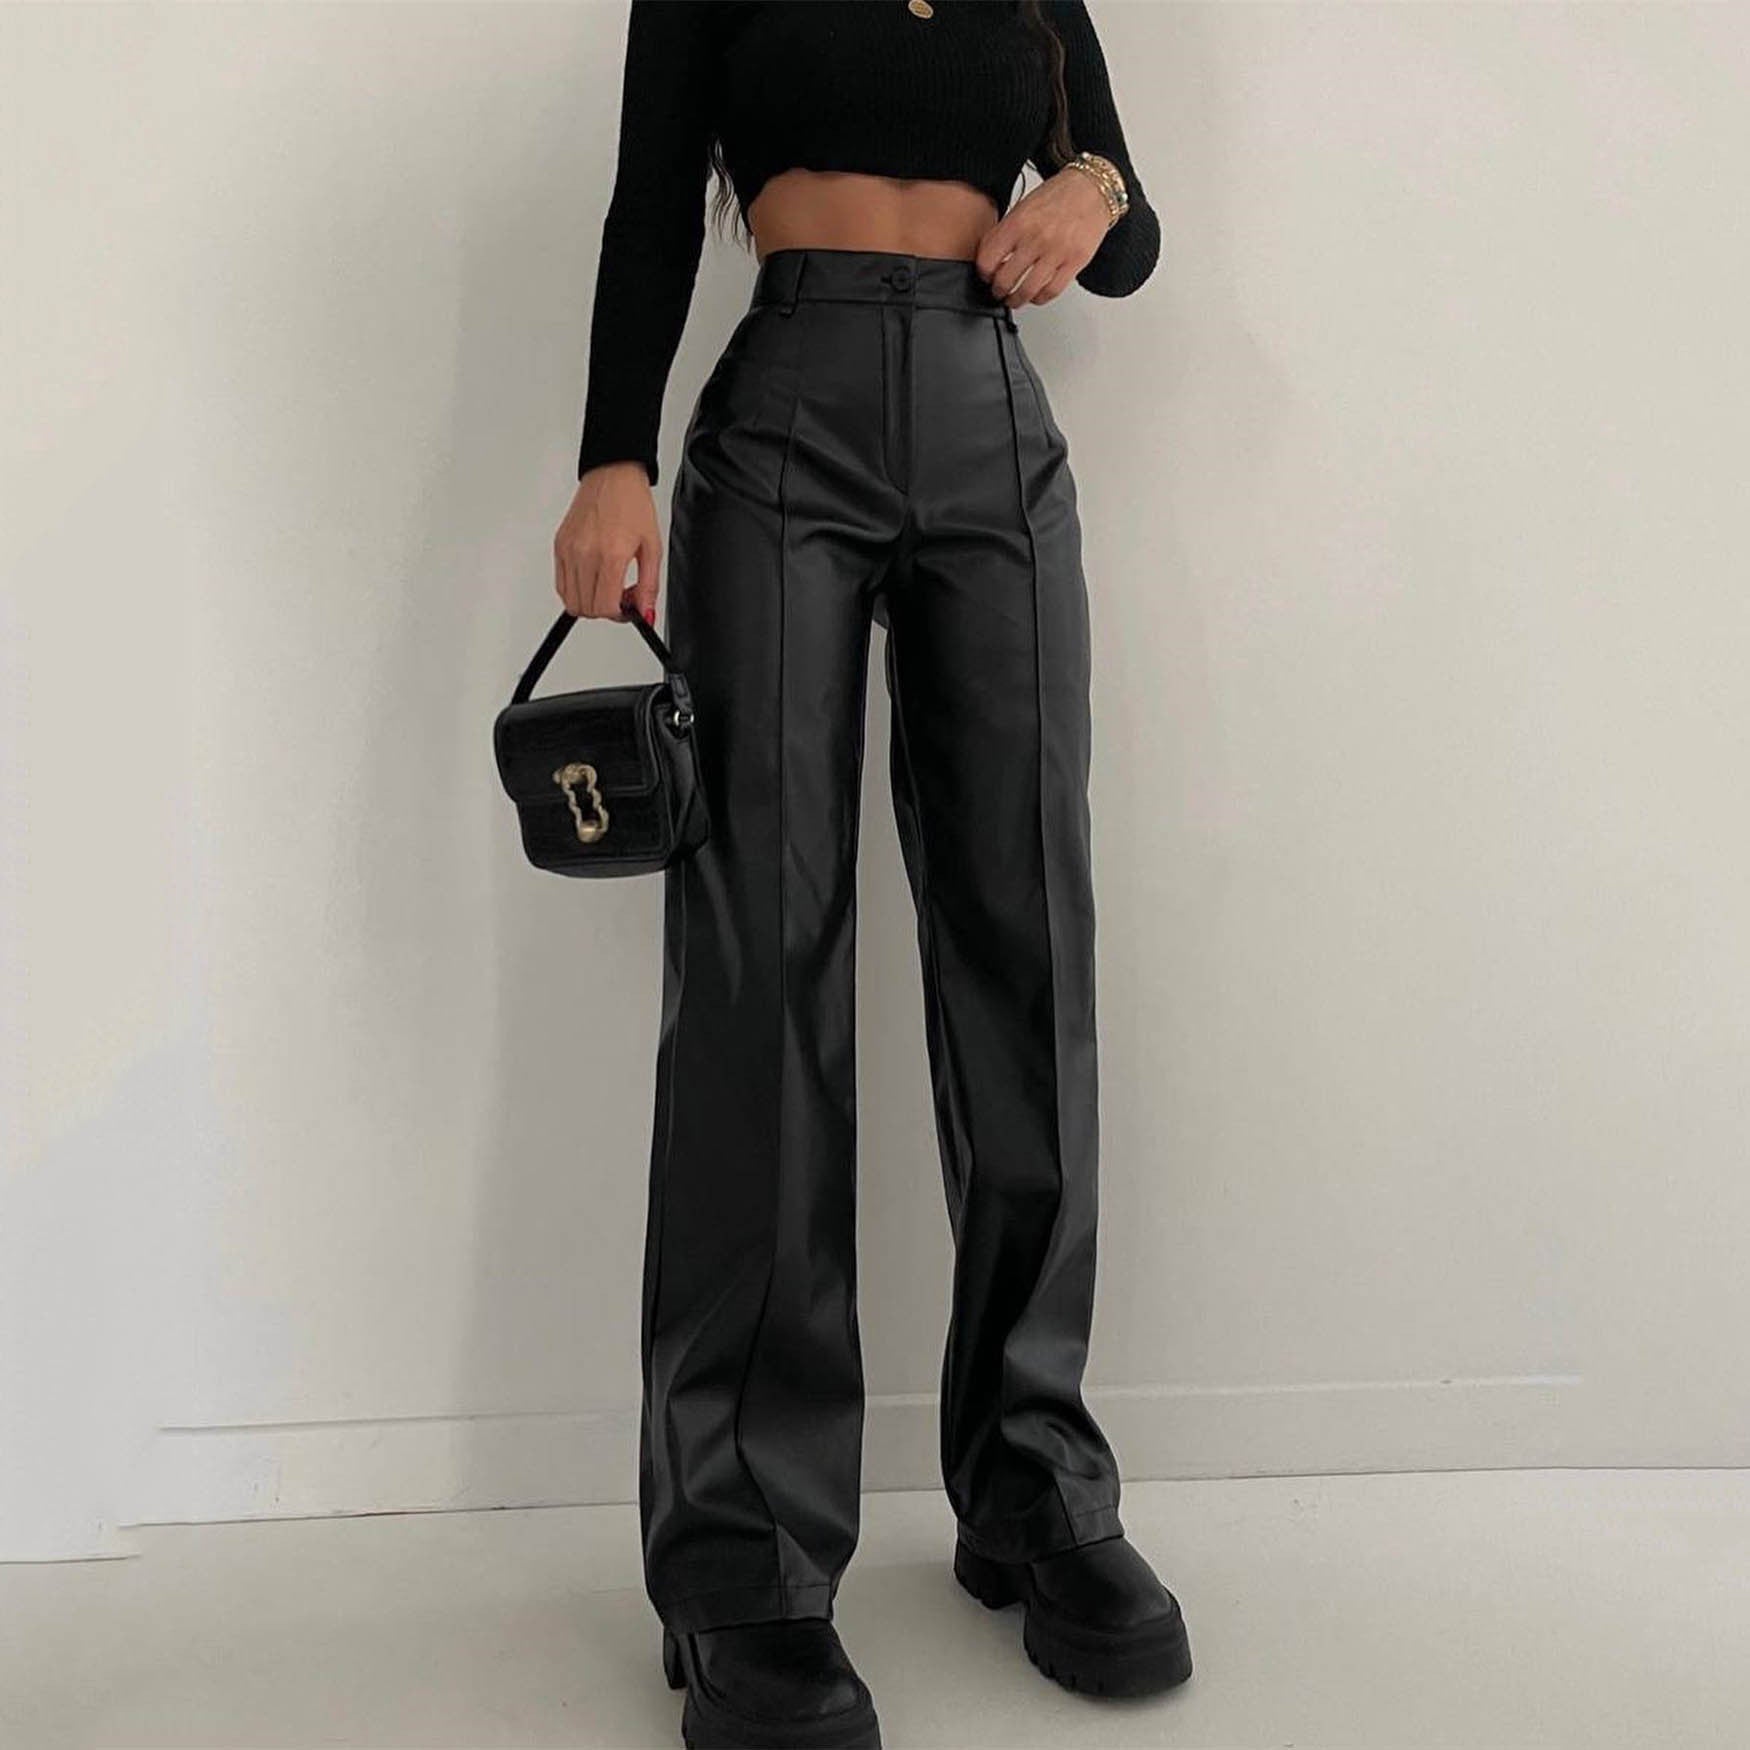 Women Clothing Faux Leather Trousers Autumn Winter Casual Pants Fried Street Cool Straight Leg Pants Figure Flattering Leather Pants Women